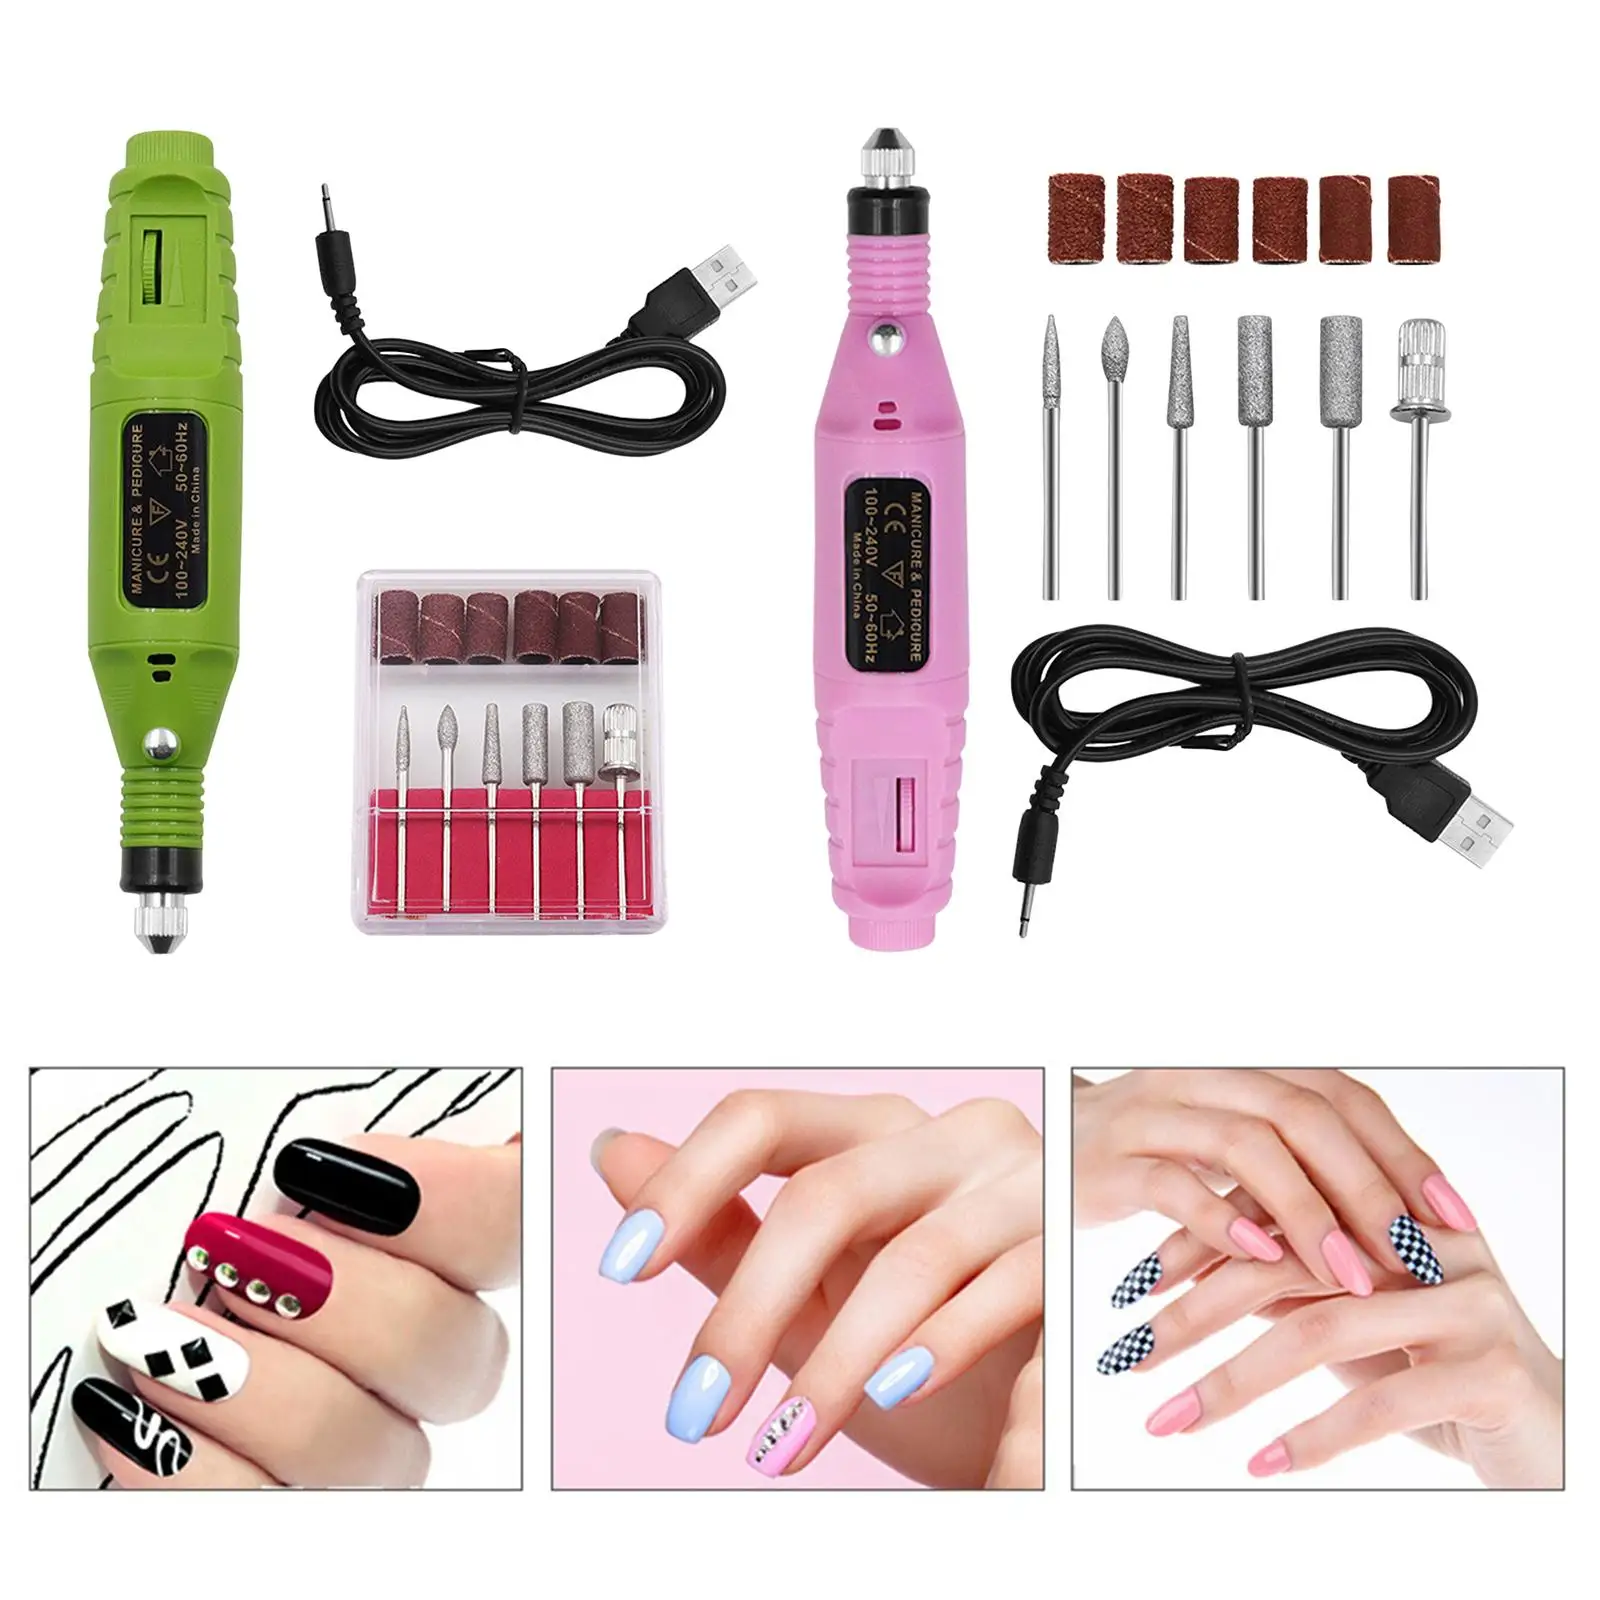 2000RPM Portable Nail Drill Pen Sander Acrylic Gel Removal Nails Art Tools for Milling Exfoliating Engraving